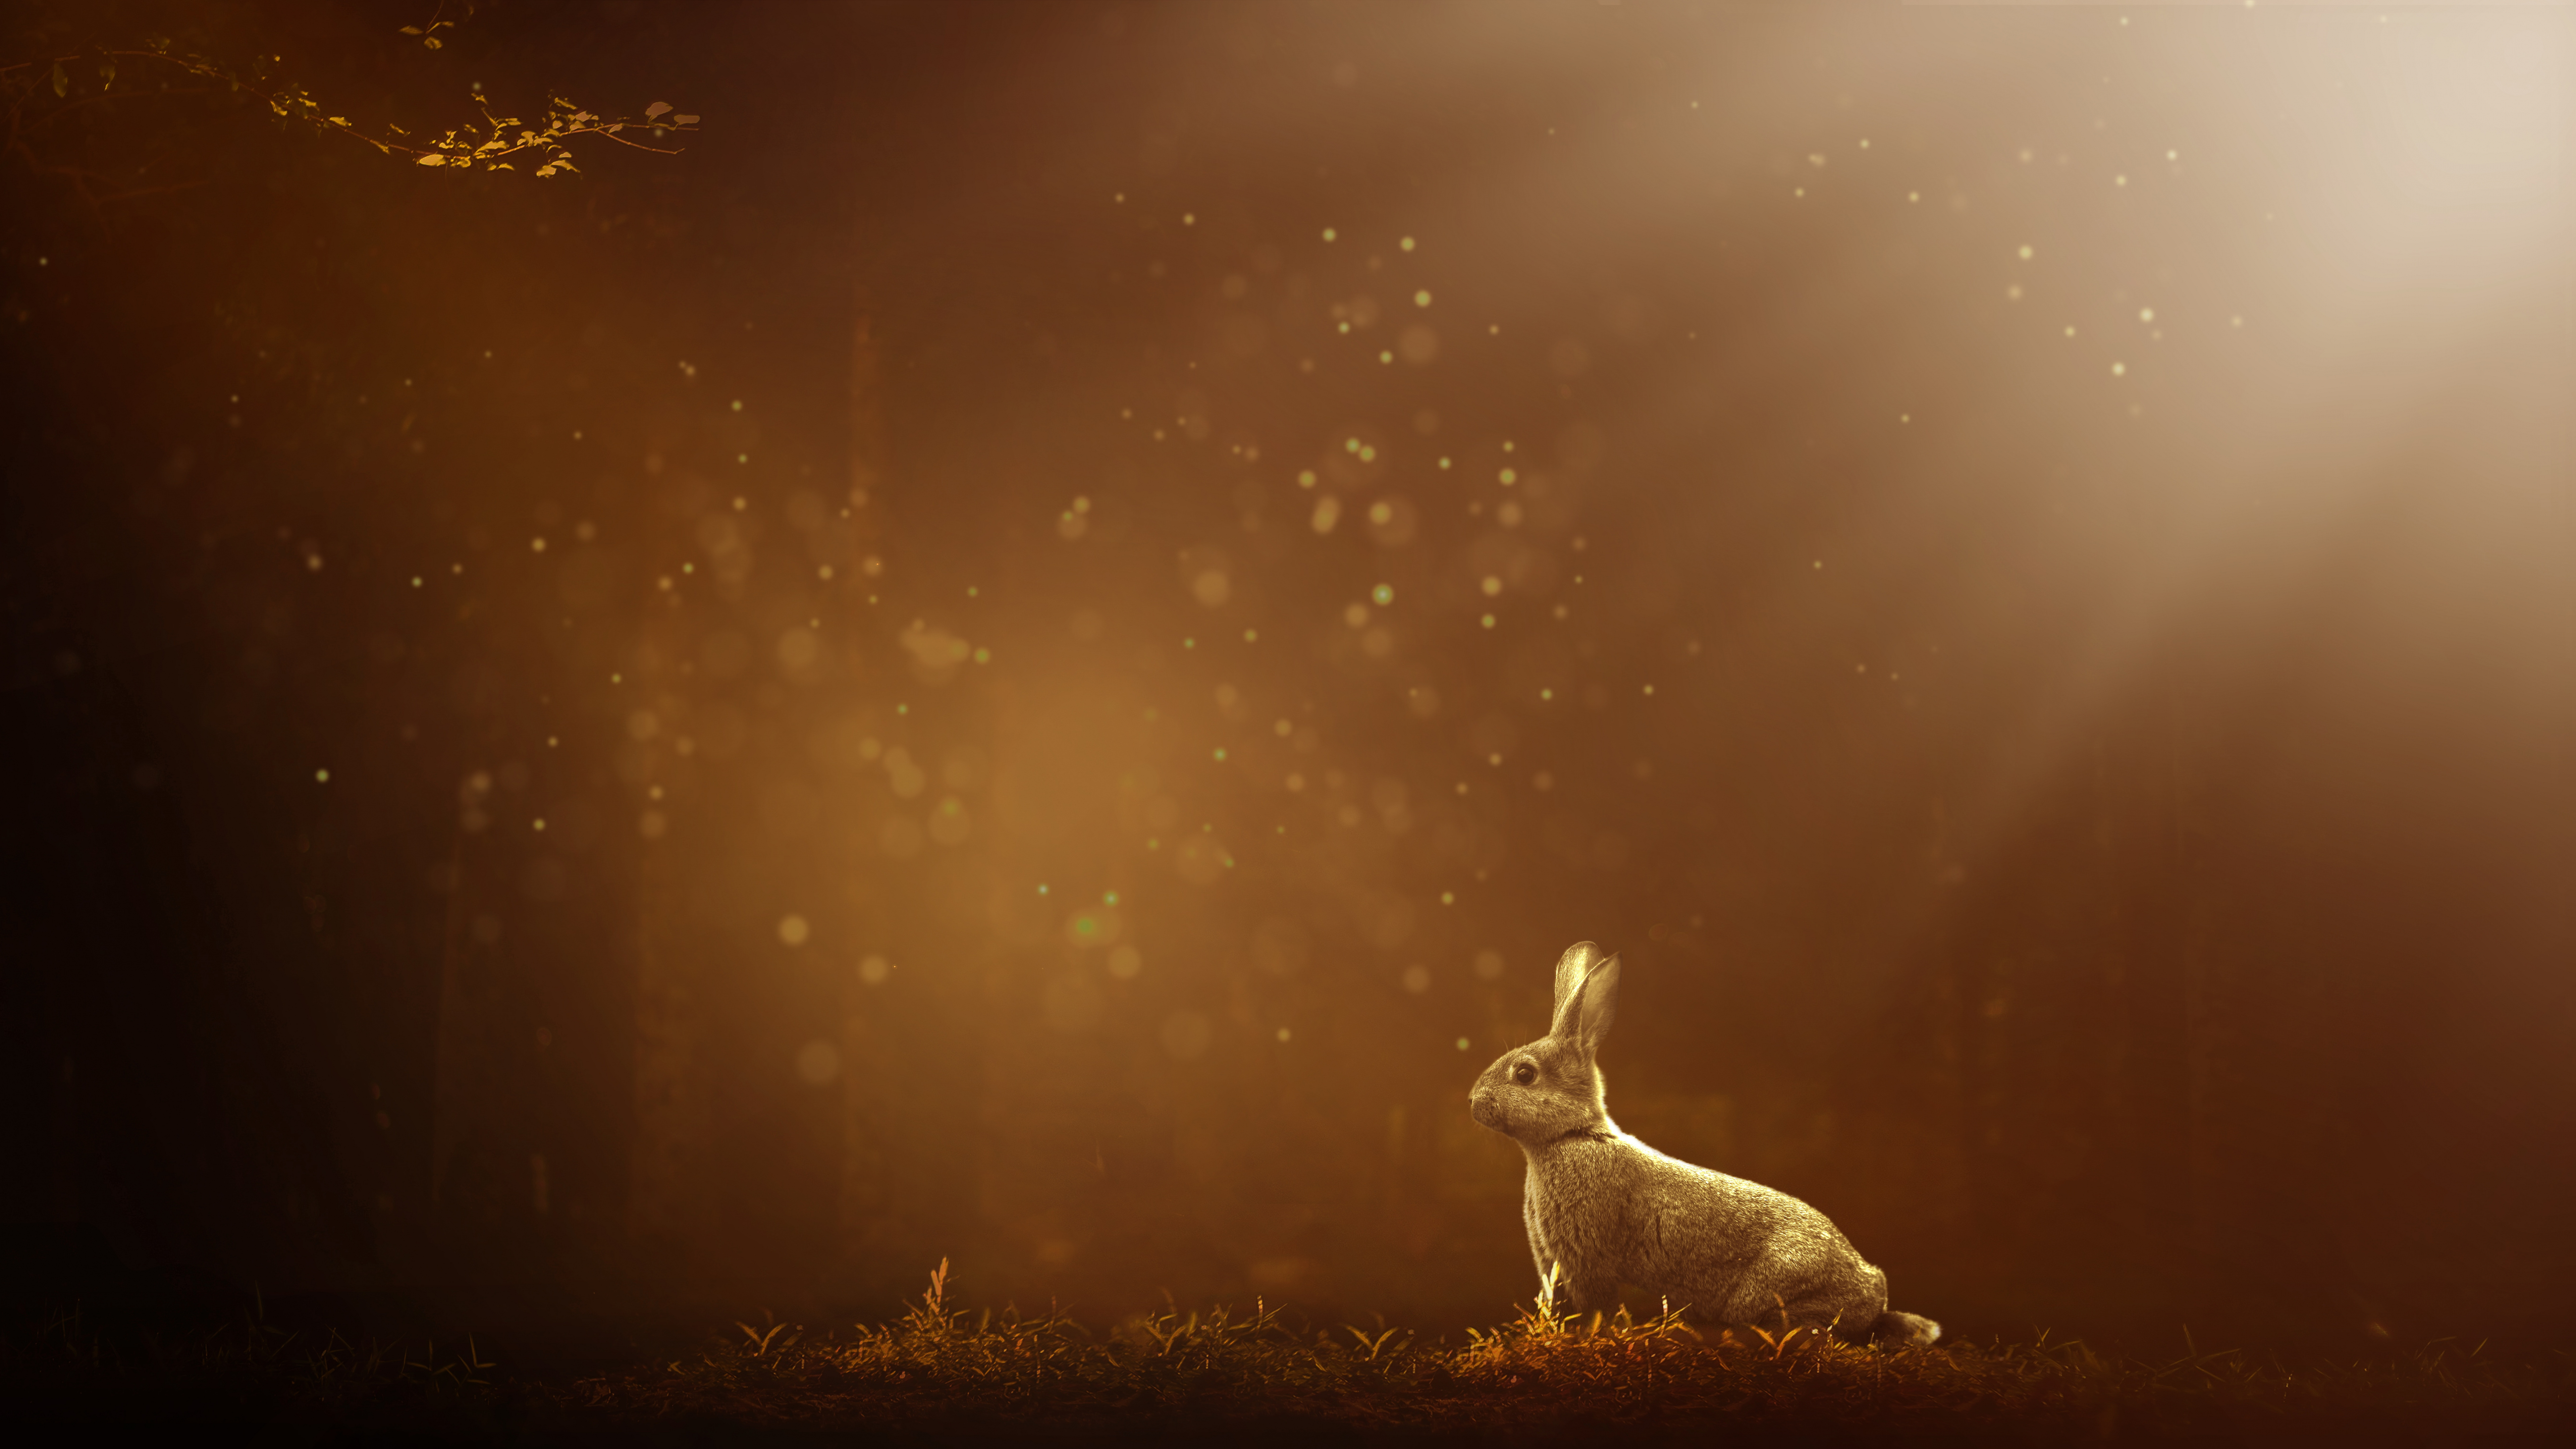 White Rabbit on Brown Grass Field During Night Time. Wallpaper in 7680x4320 Resolution